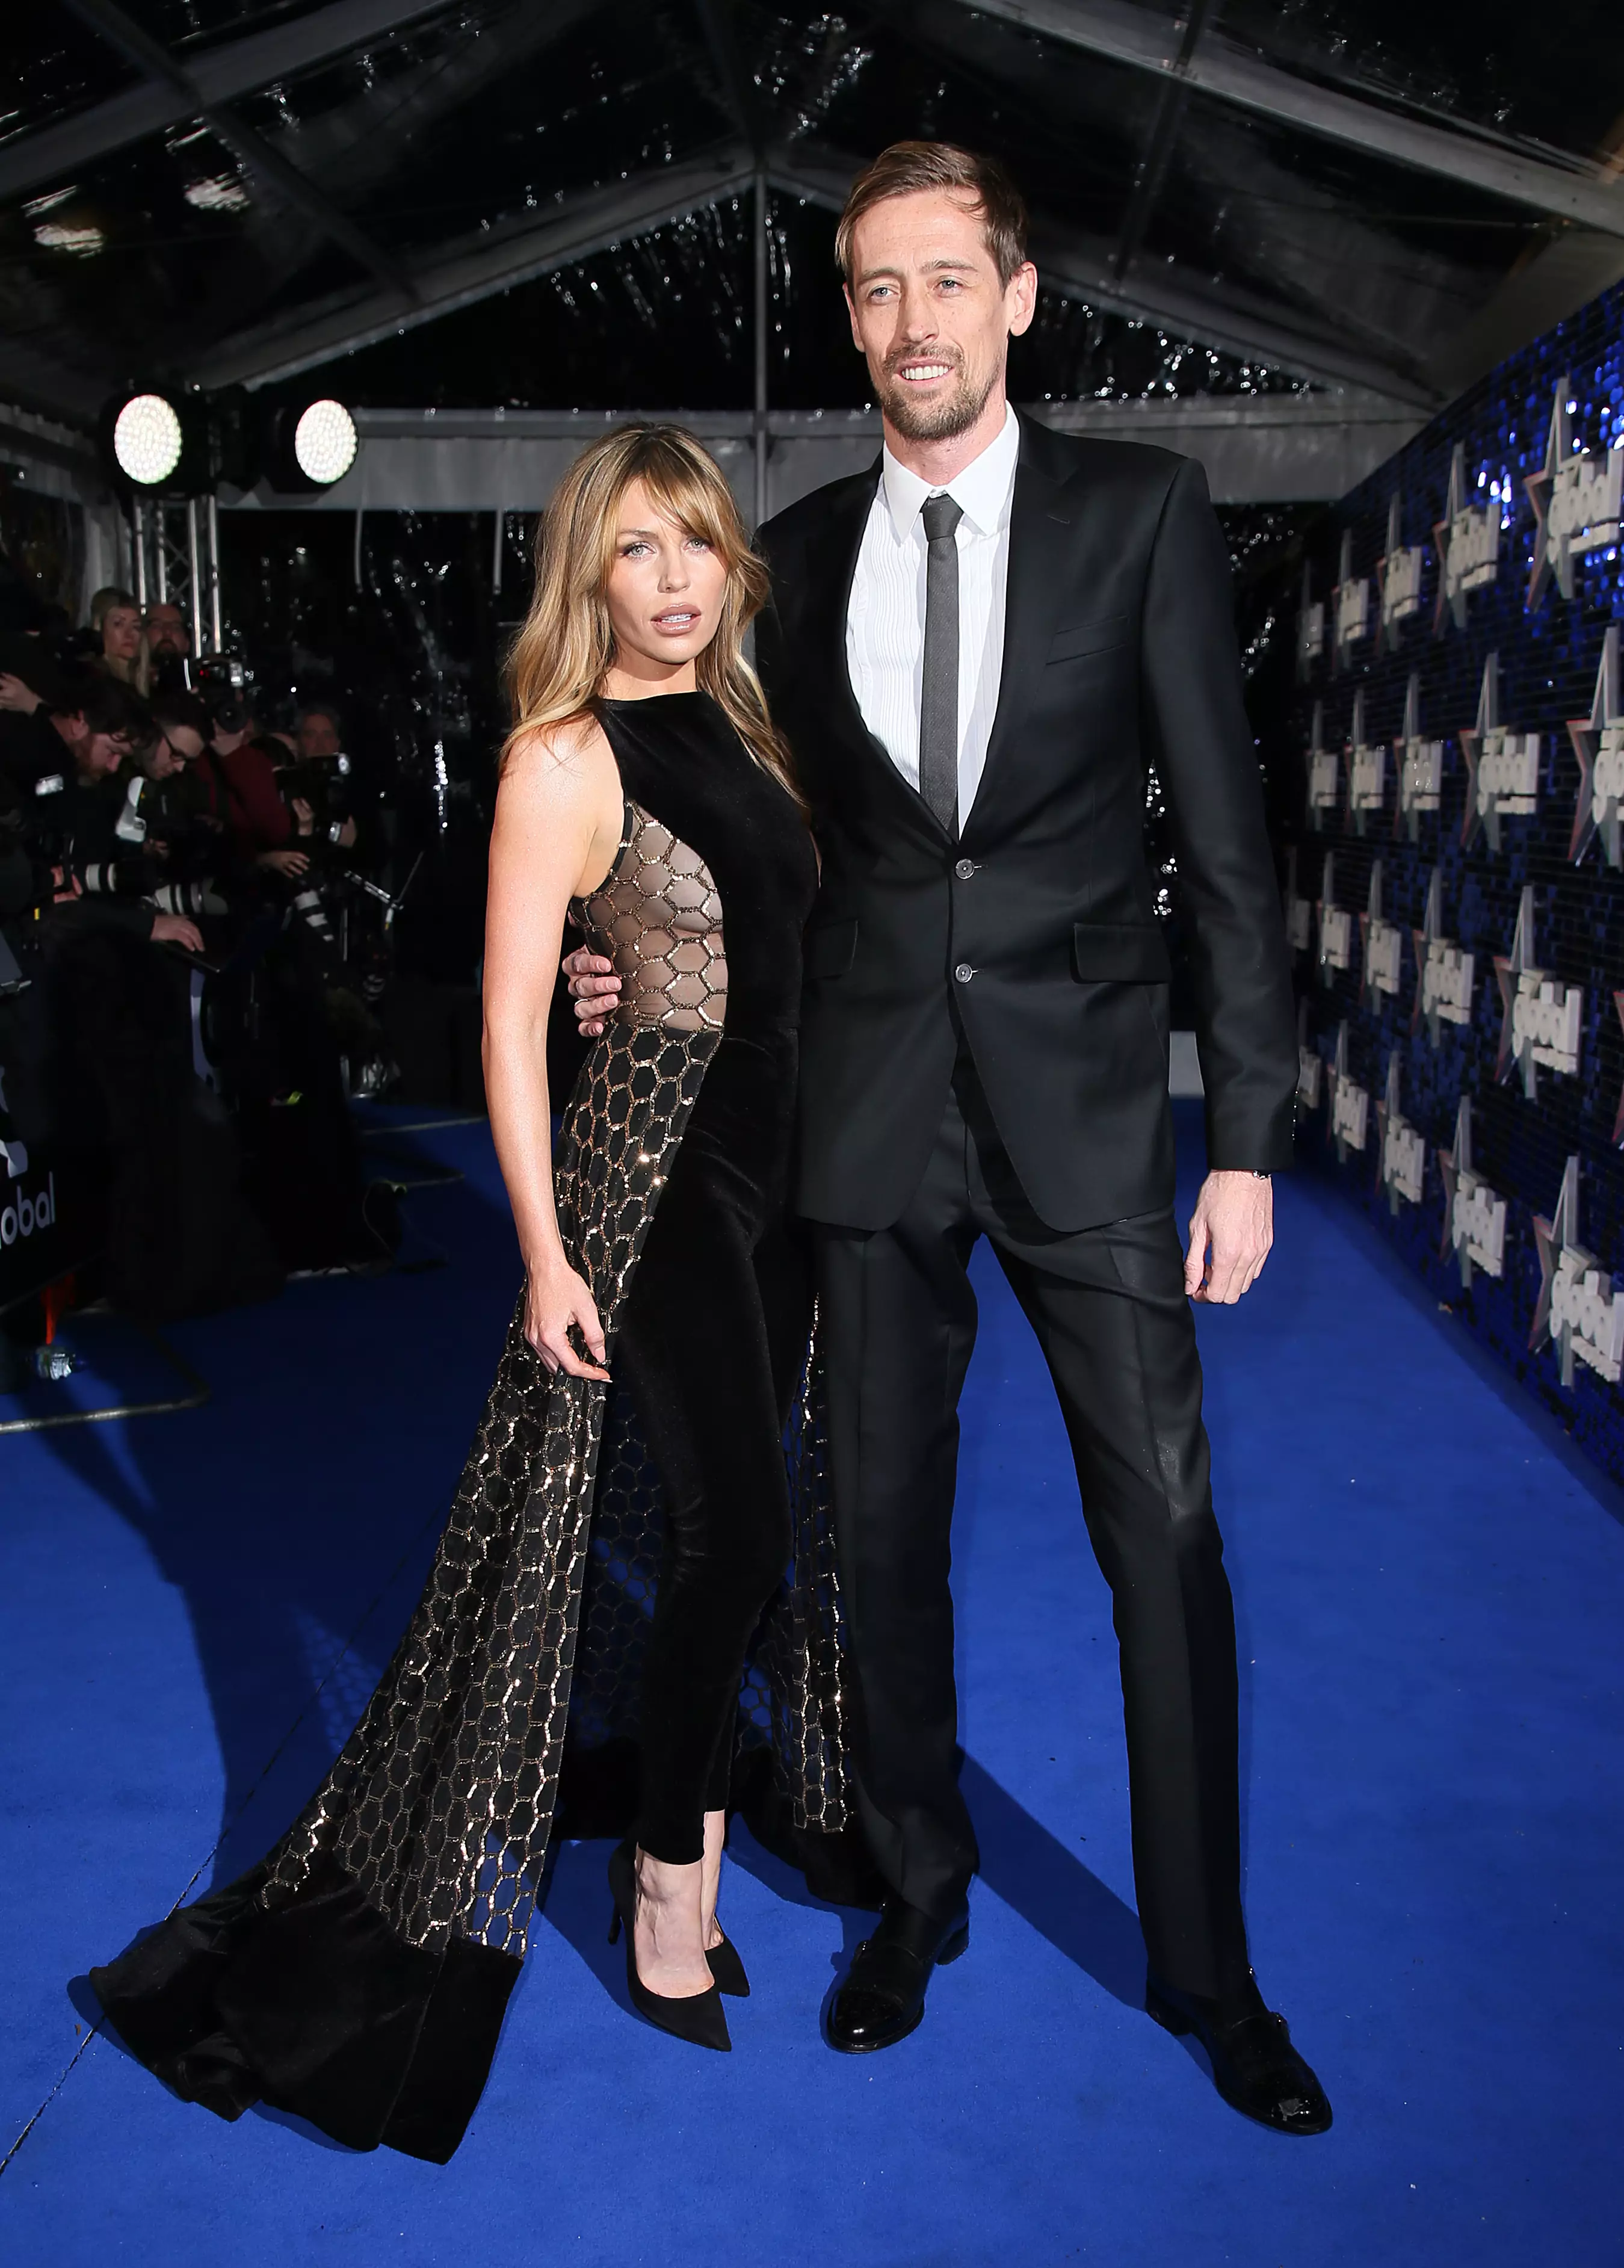 Peter Crouch met Abbey Clancy back in 2006 and they wed in 2011.